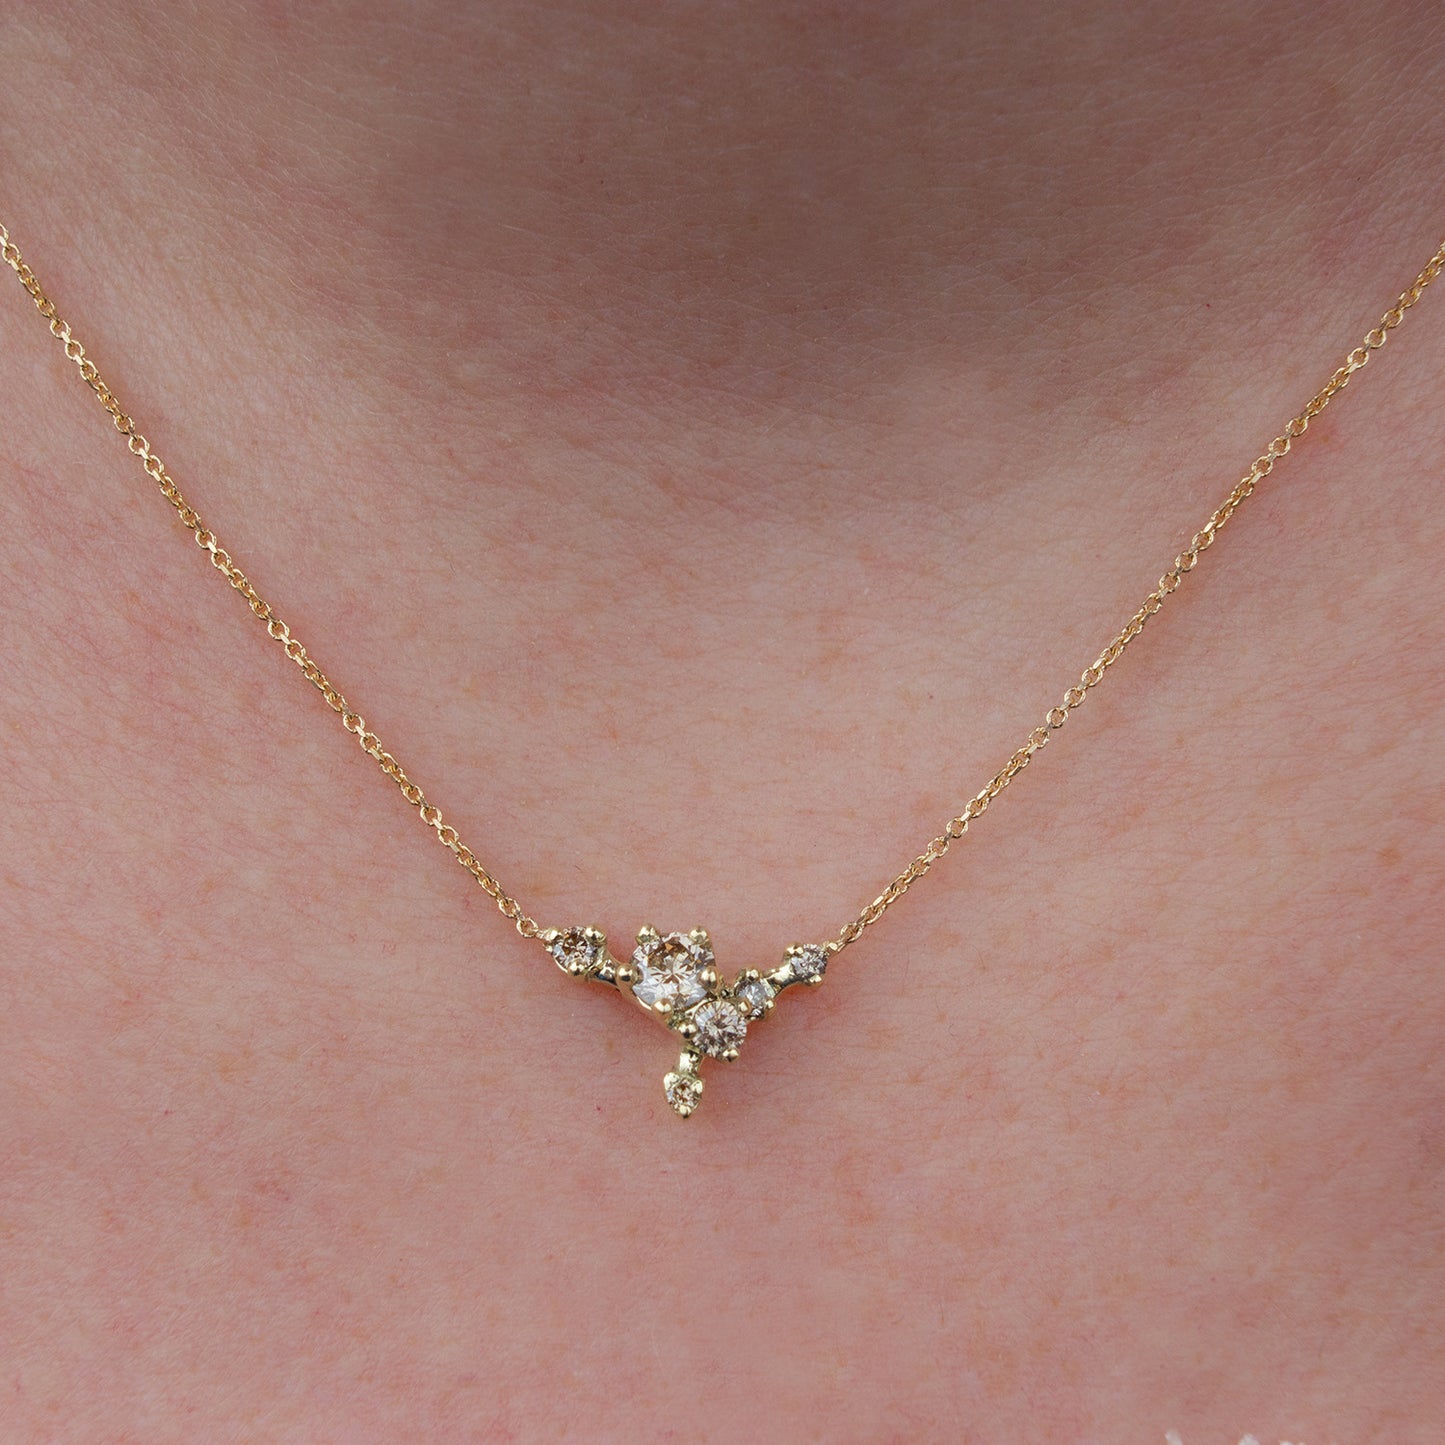 Delicate cluster necklace featuring champagne diamonds and inspired by first blossoms.